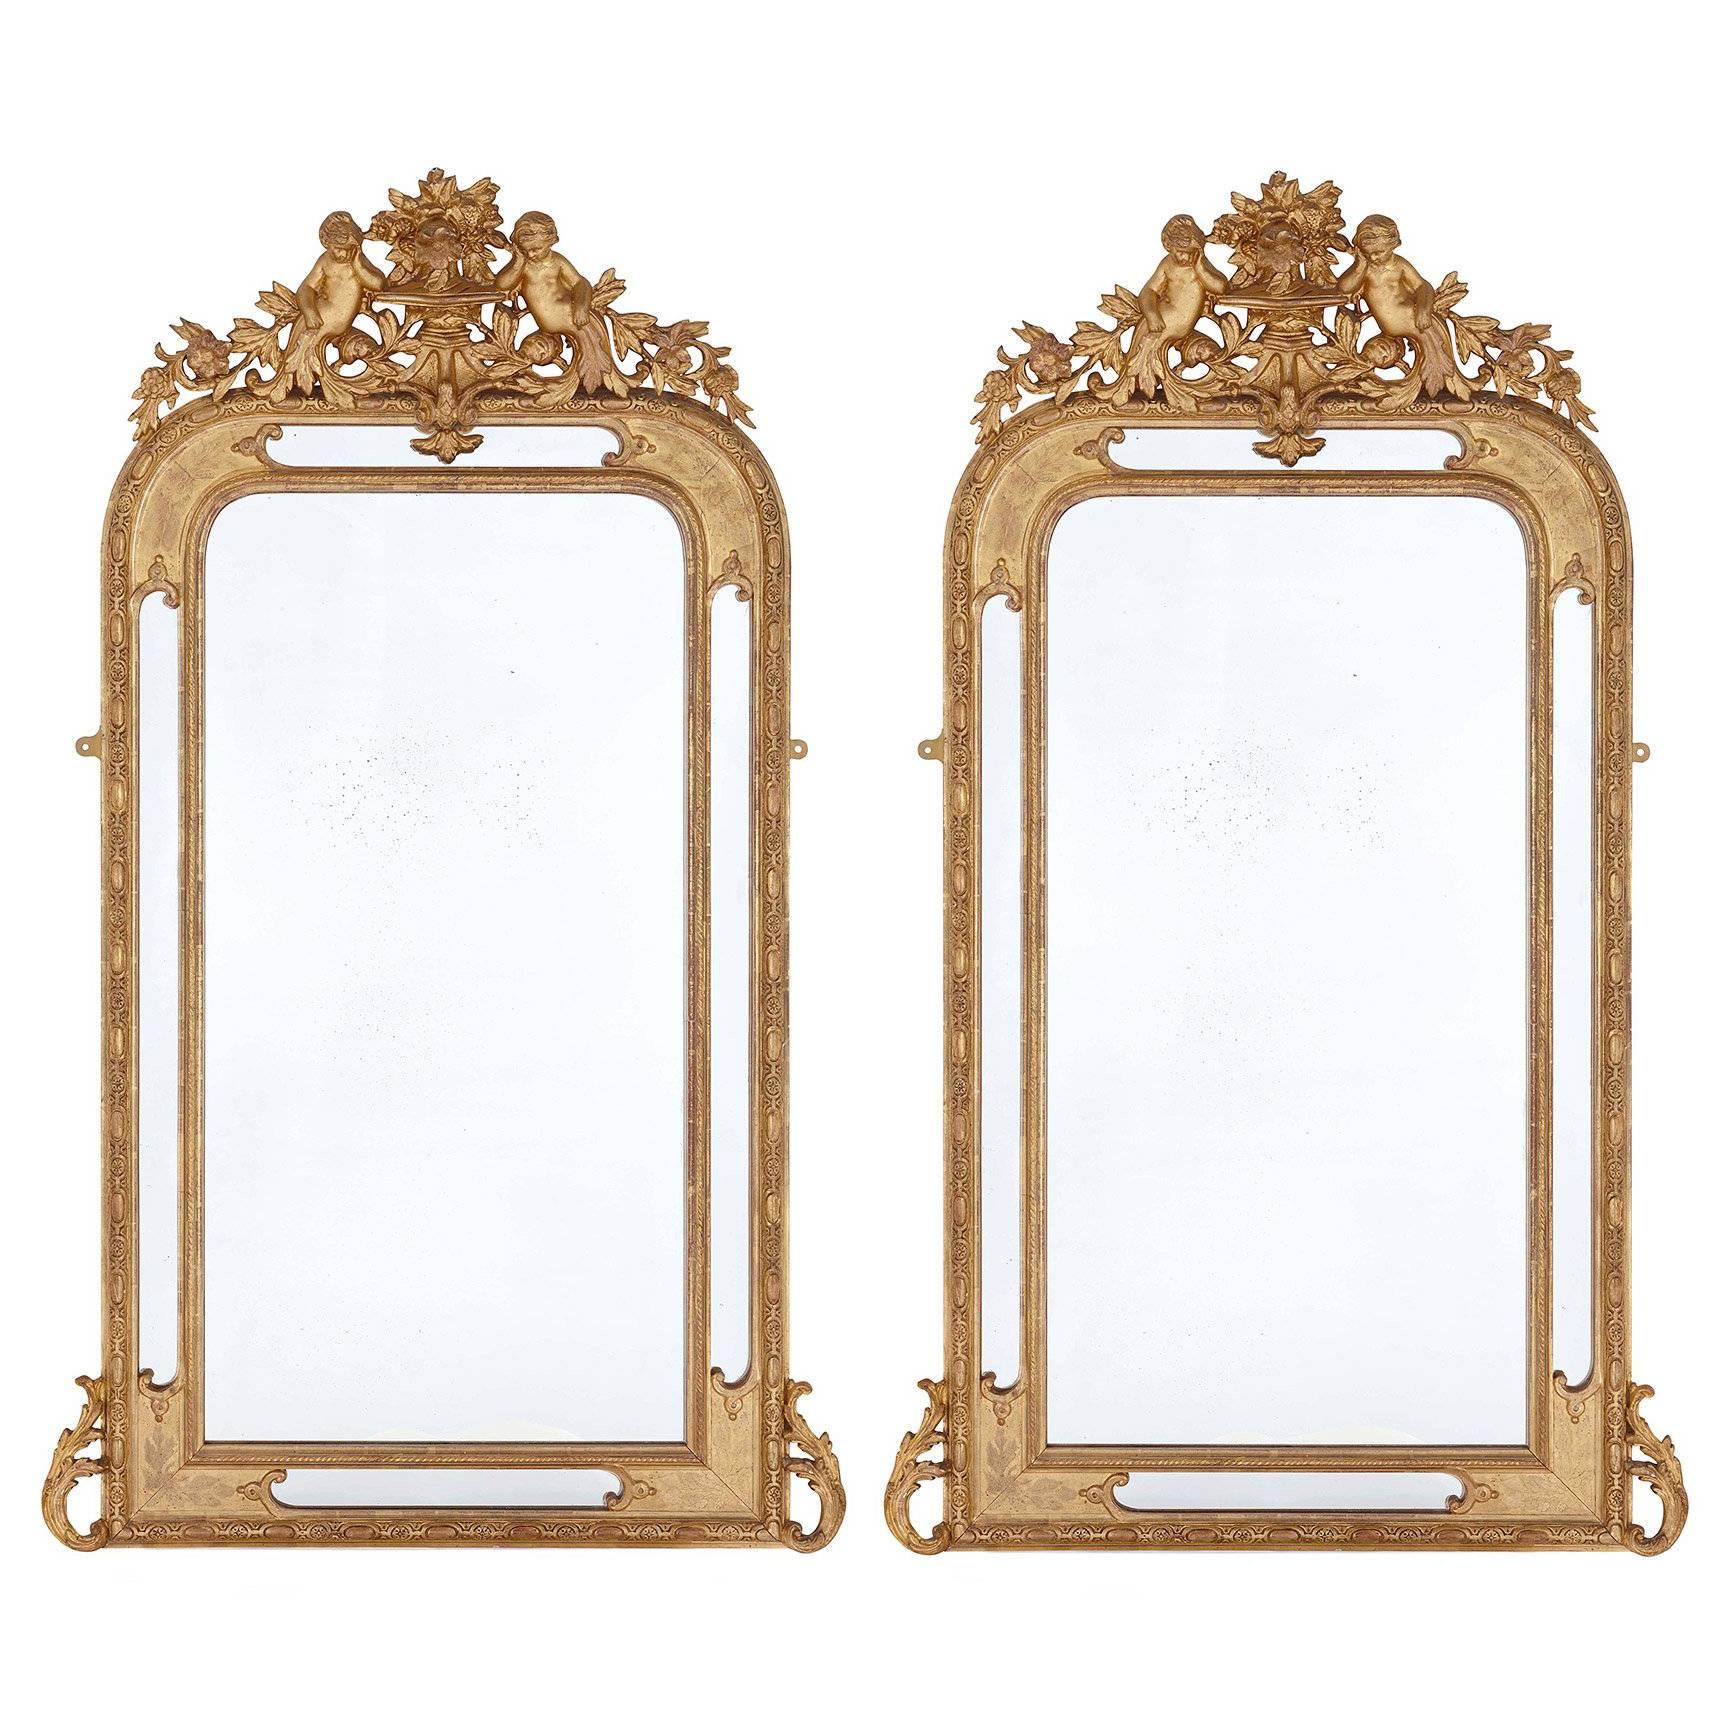 Pair of French Antique Carved Giltwood Mirrors in the Neoclassical Style